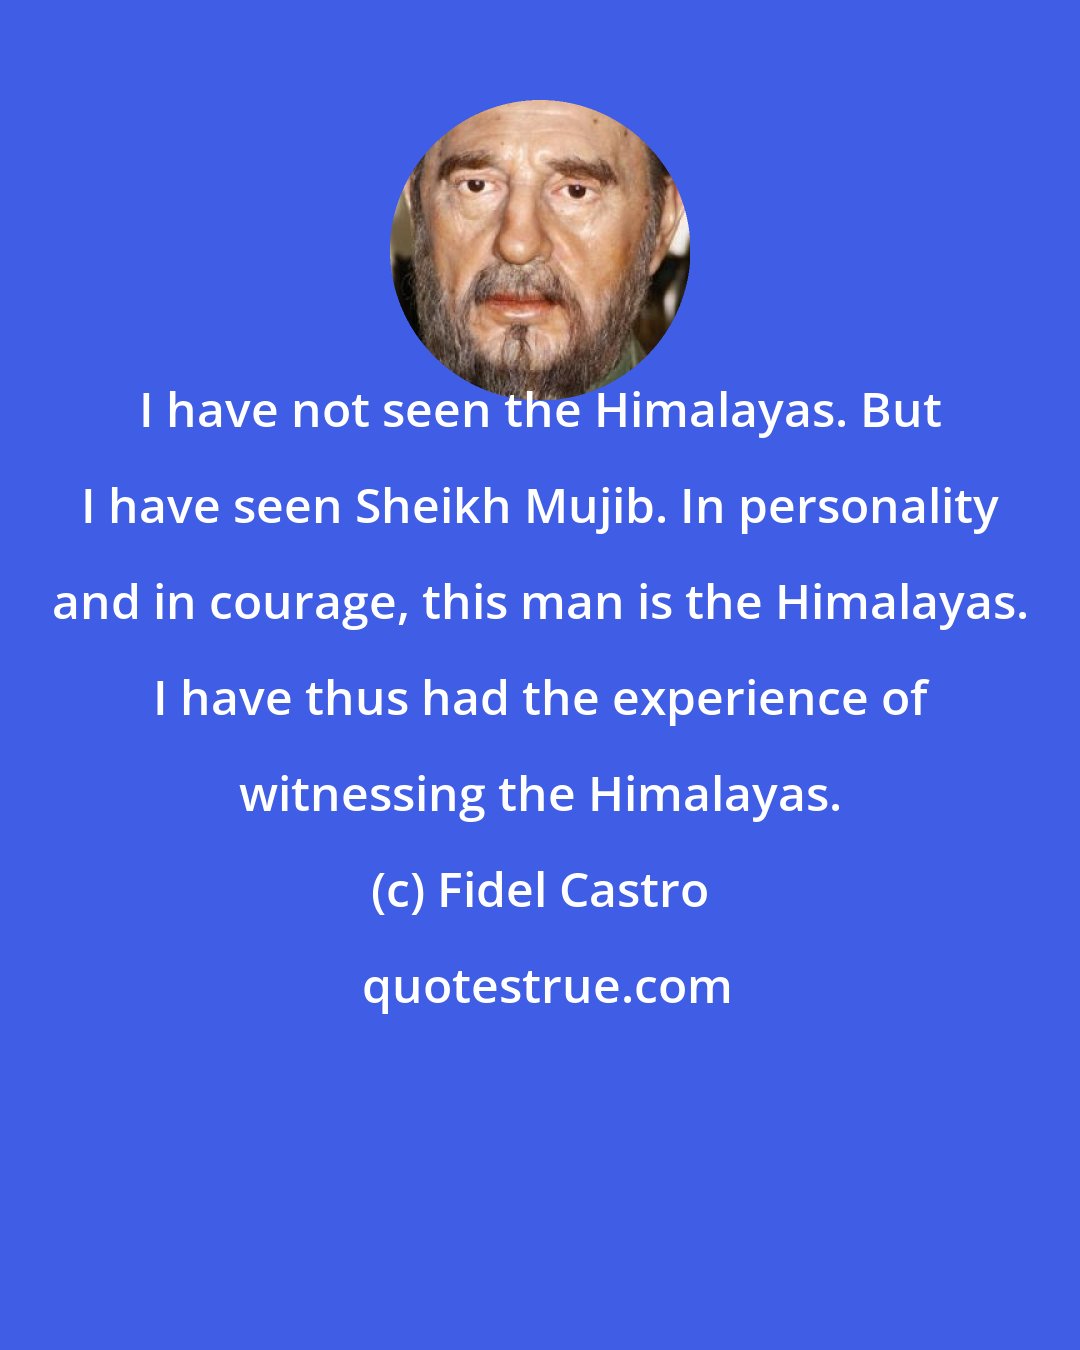 Fidel Castro: I have not seen the Himalayas. But I have seen Sheikh Mujib. In personality and in courage, this man is the Himalayas. I have thus had the experience of witnessing the Himalayas.